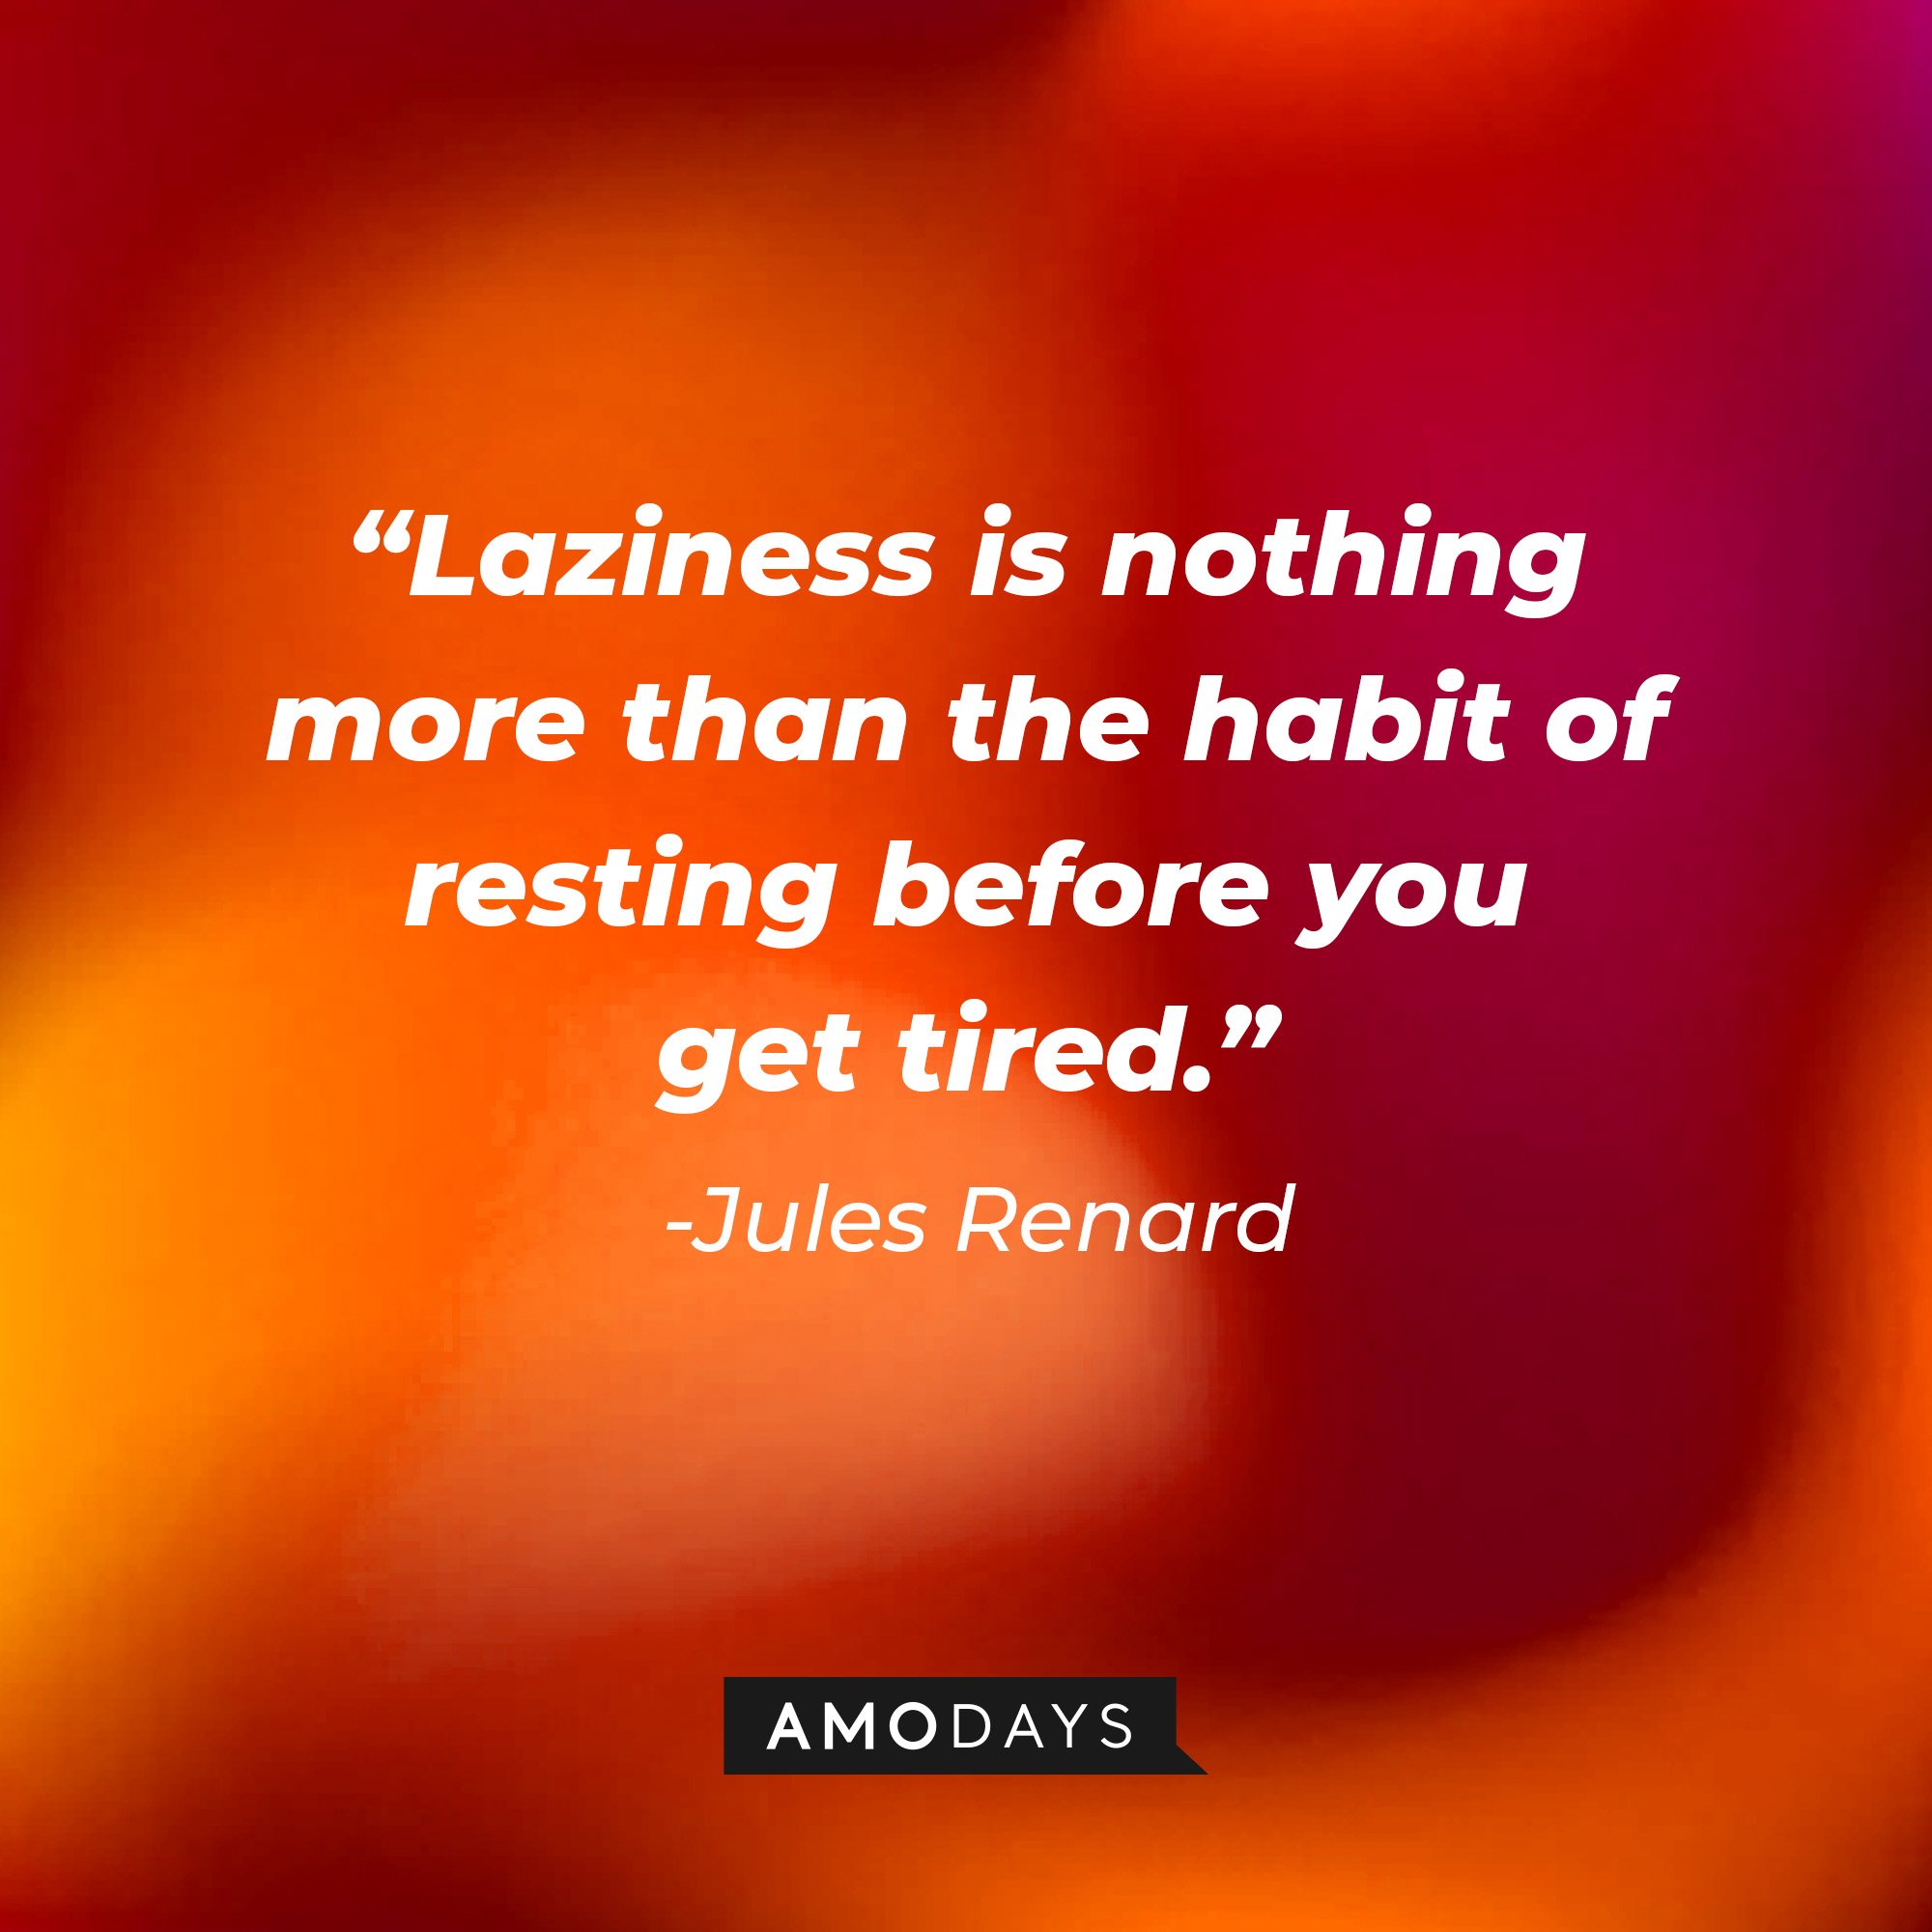 Jules Renard's quote: “Laziness is nothing more than the habit of resting before you get tired.” | Image: AmoDays